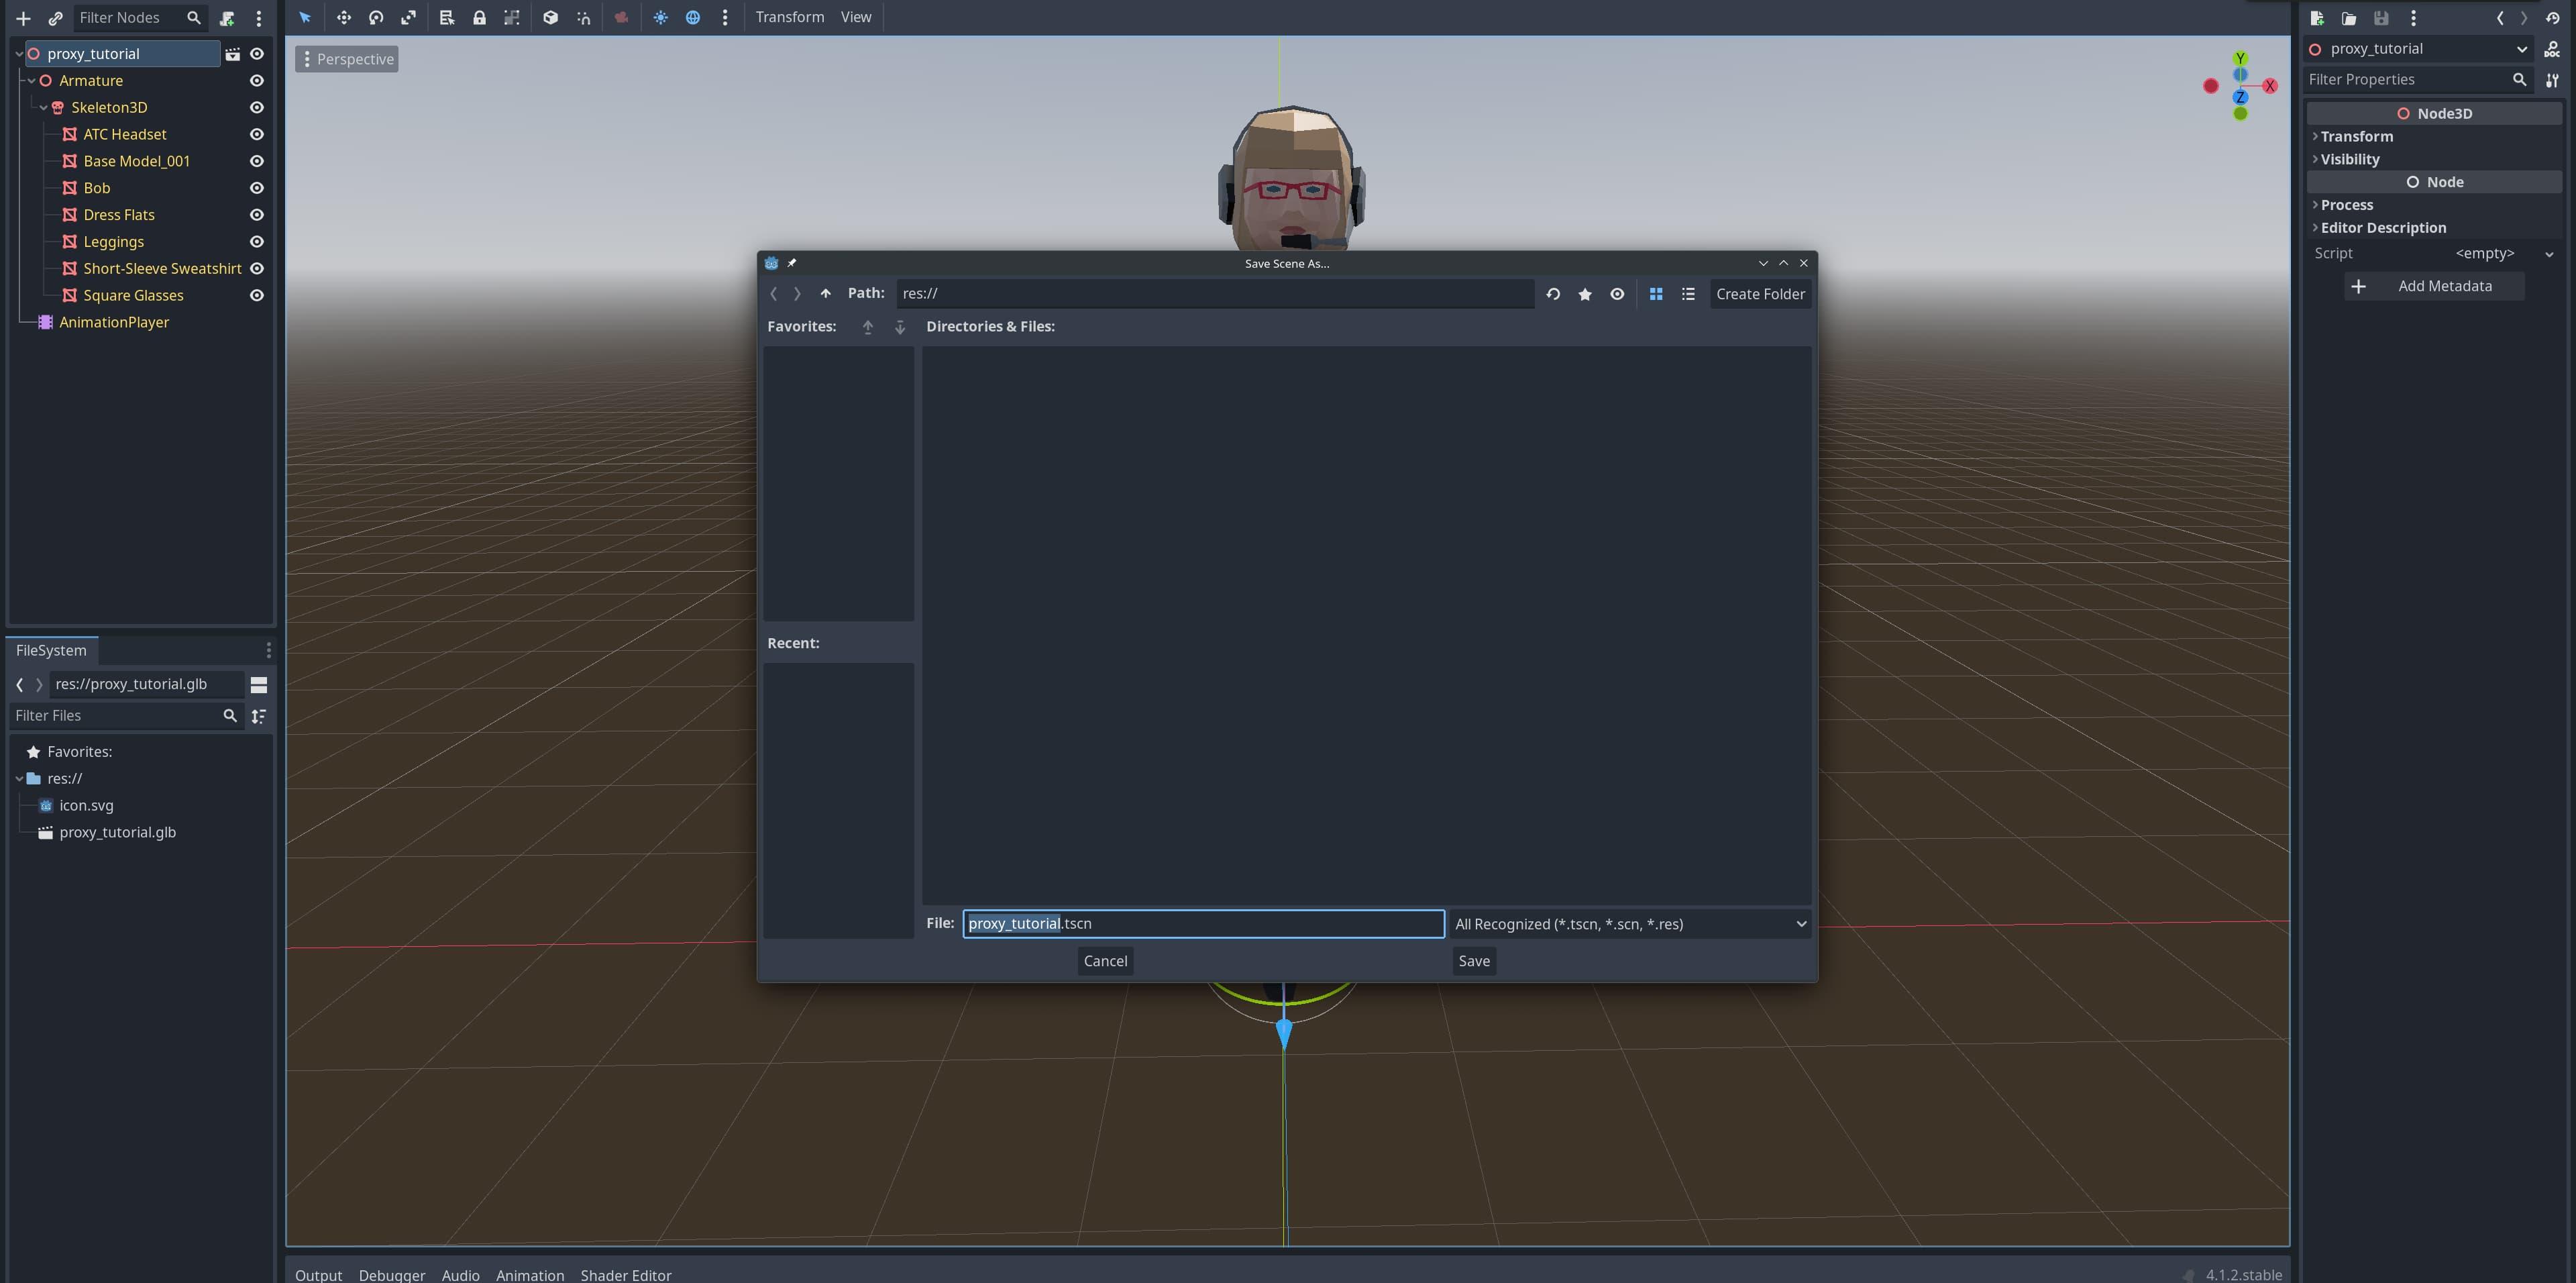 Godot Engine screenshot, showing a dialog to save the scene